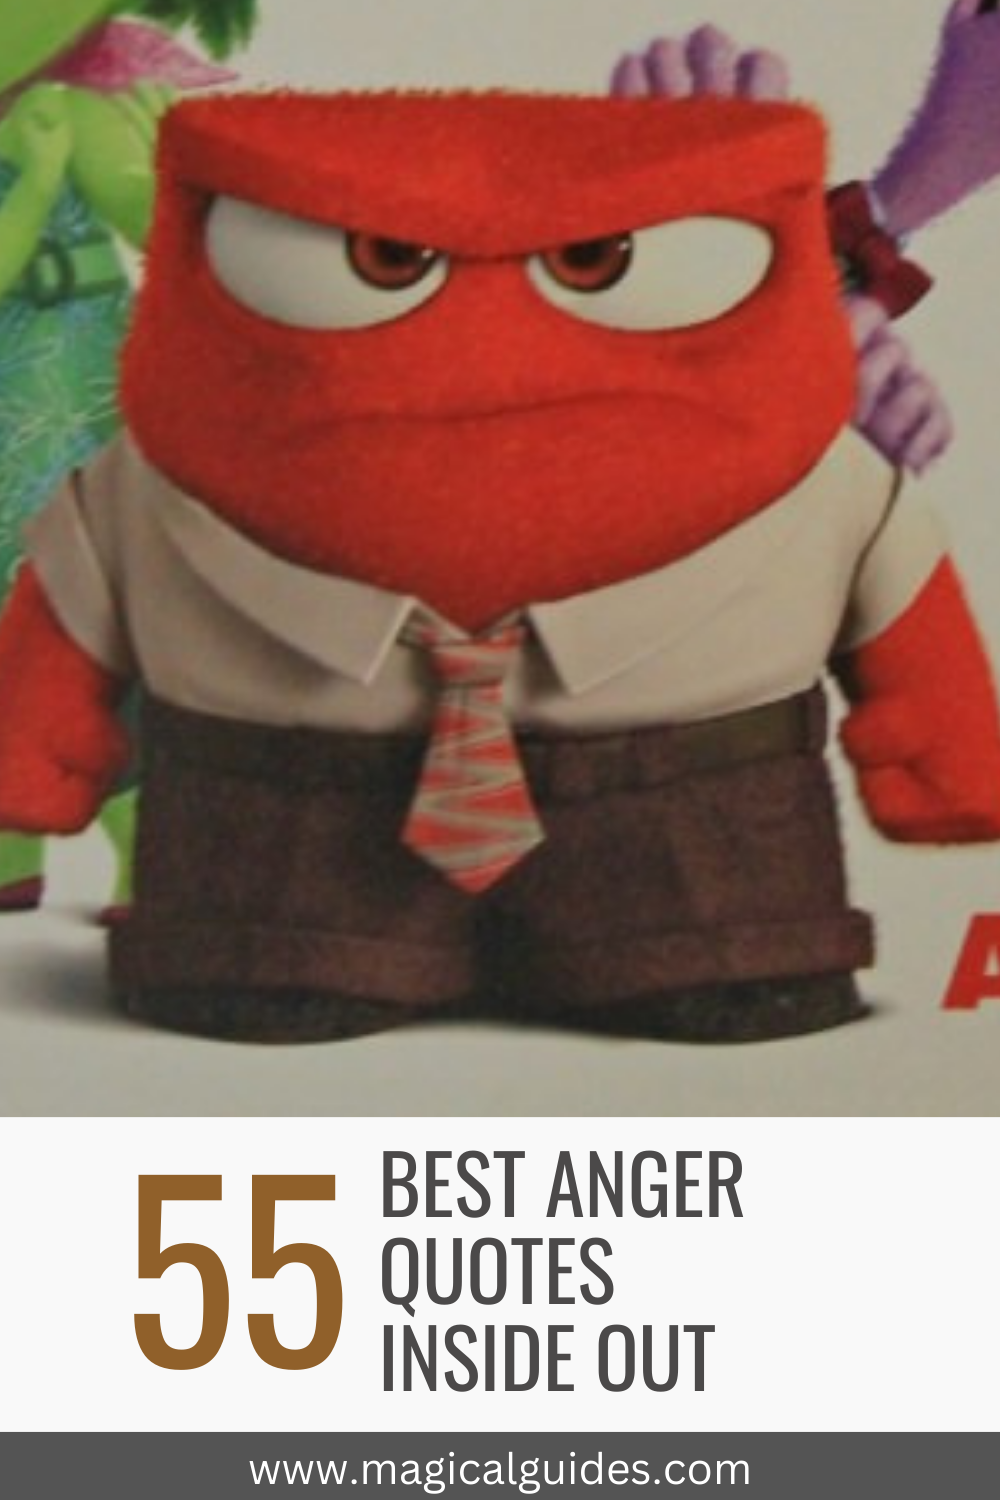 Inside Out Quotes Disney, 55 Anger Quotes from Inside Out.